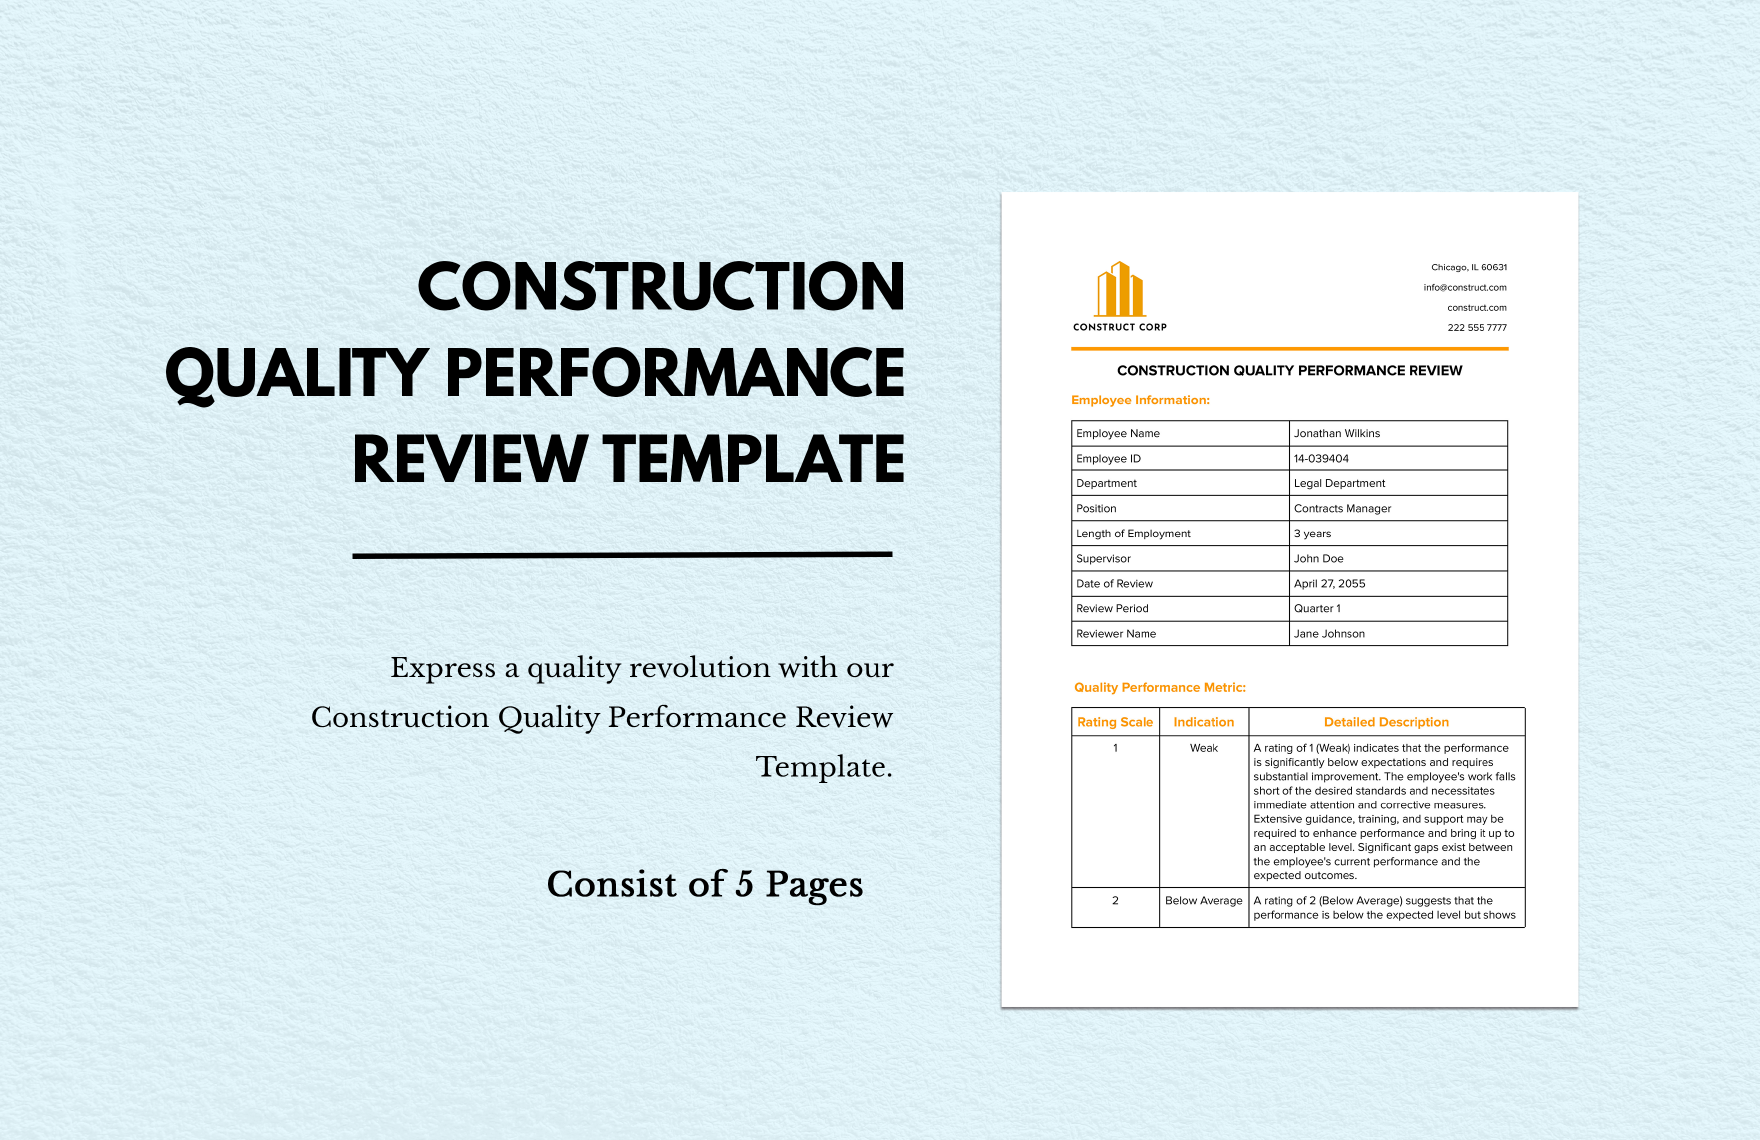 Construction Quality Performance Review 